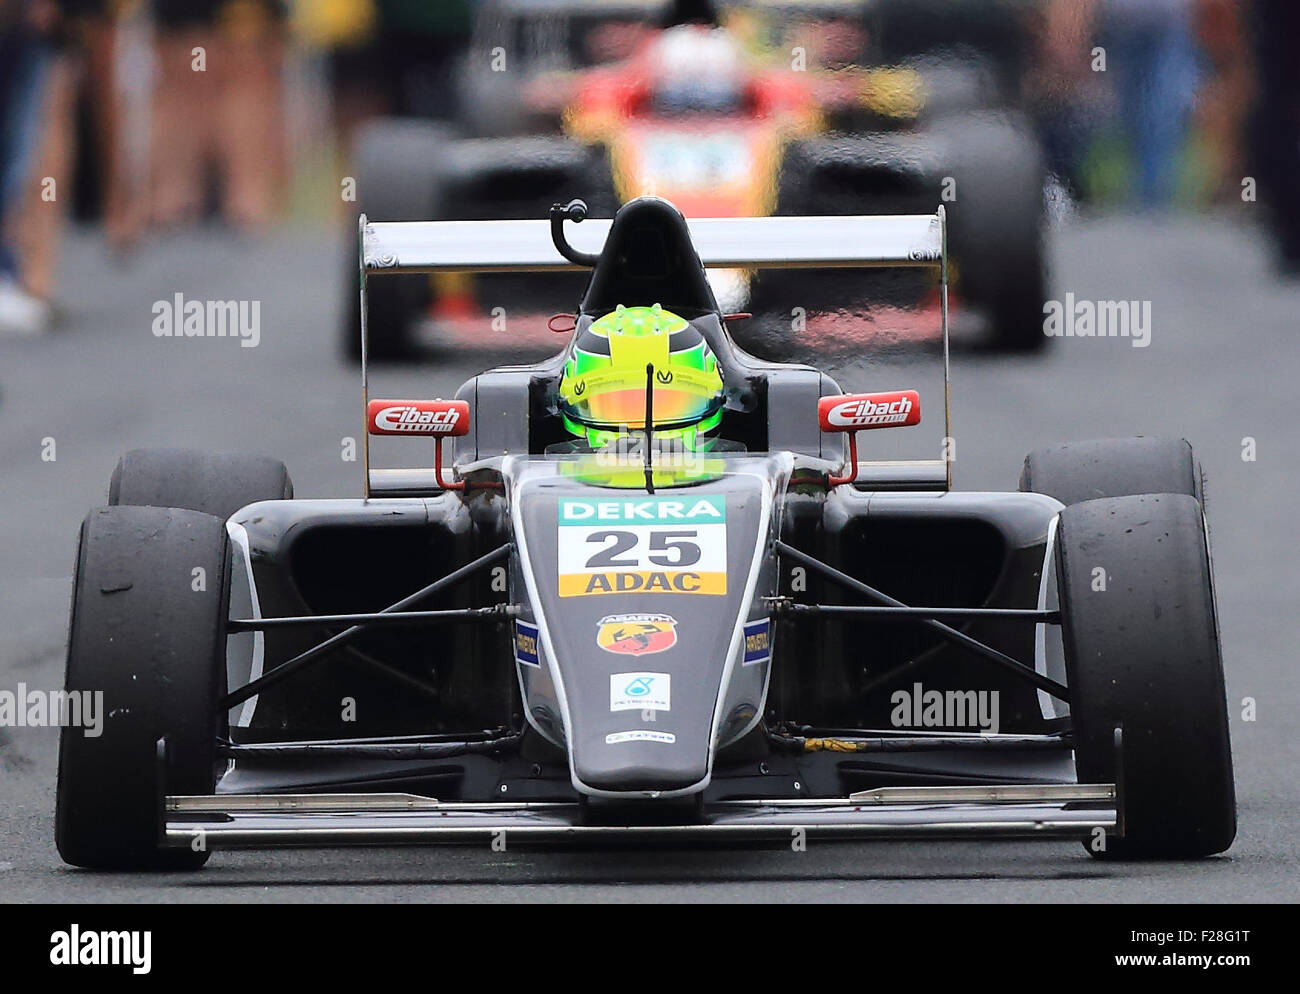 Oschersleben, Germany. 13th Sep, 2015. German Forumla 4 pilot Mick Schumacher of the Dutch team 'Van Amersfoort Racing' prepares for his third run at the ADAC Formula 4 race in Oschersleben, Germany, 13 September 2015. The son of Formula 1 record world champion Michael Schumacher was eliminated after a collission in the third race of the day. Photo: Jens Wolf/dpa/Alamy Live News Stock Photo